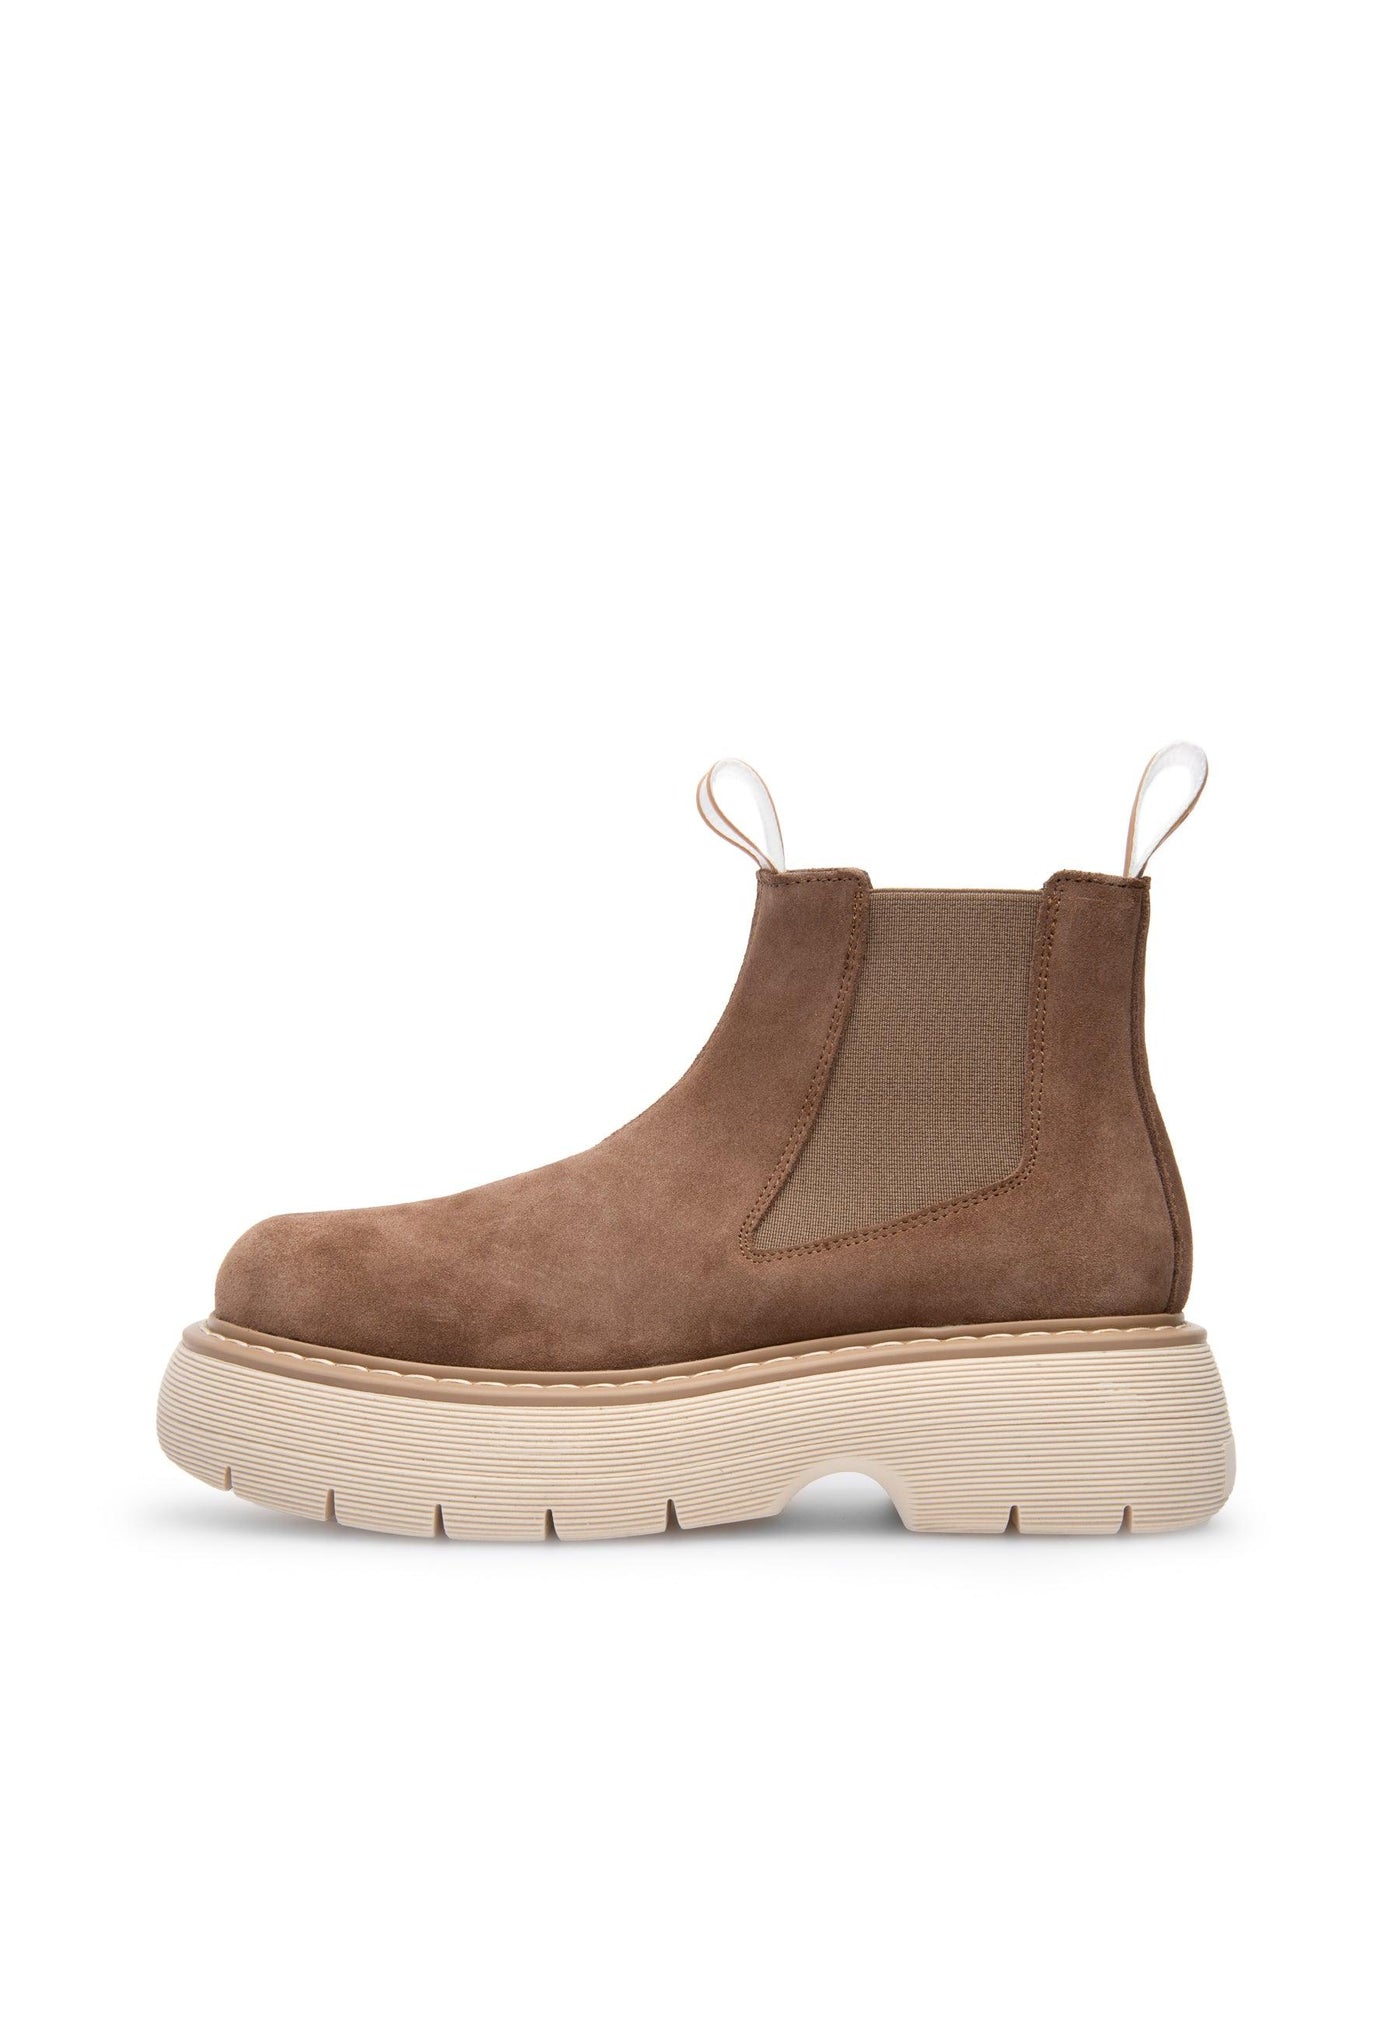 LÄST Ella Chelsea Boot Ankle Boots Taupe/Off White